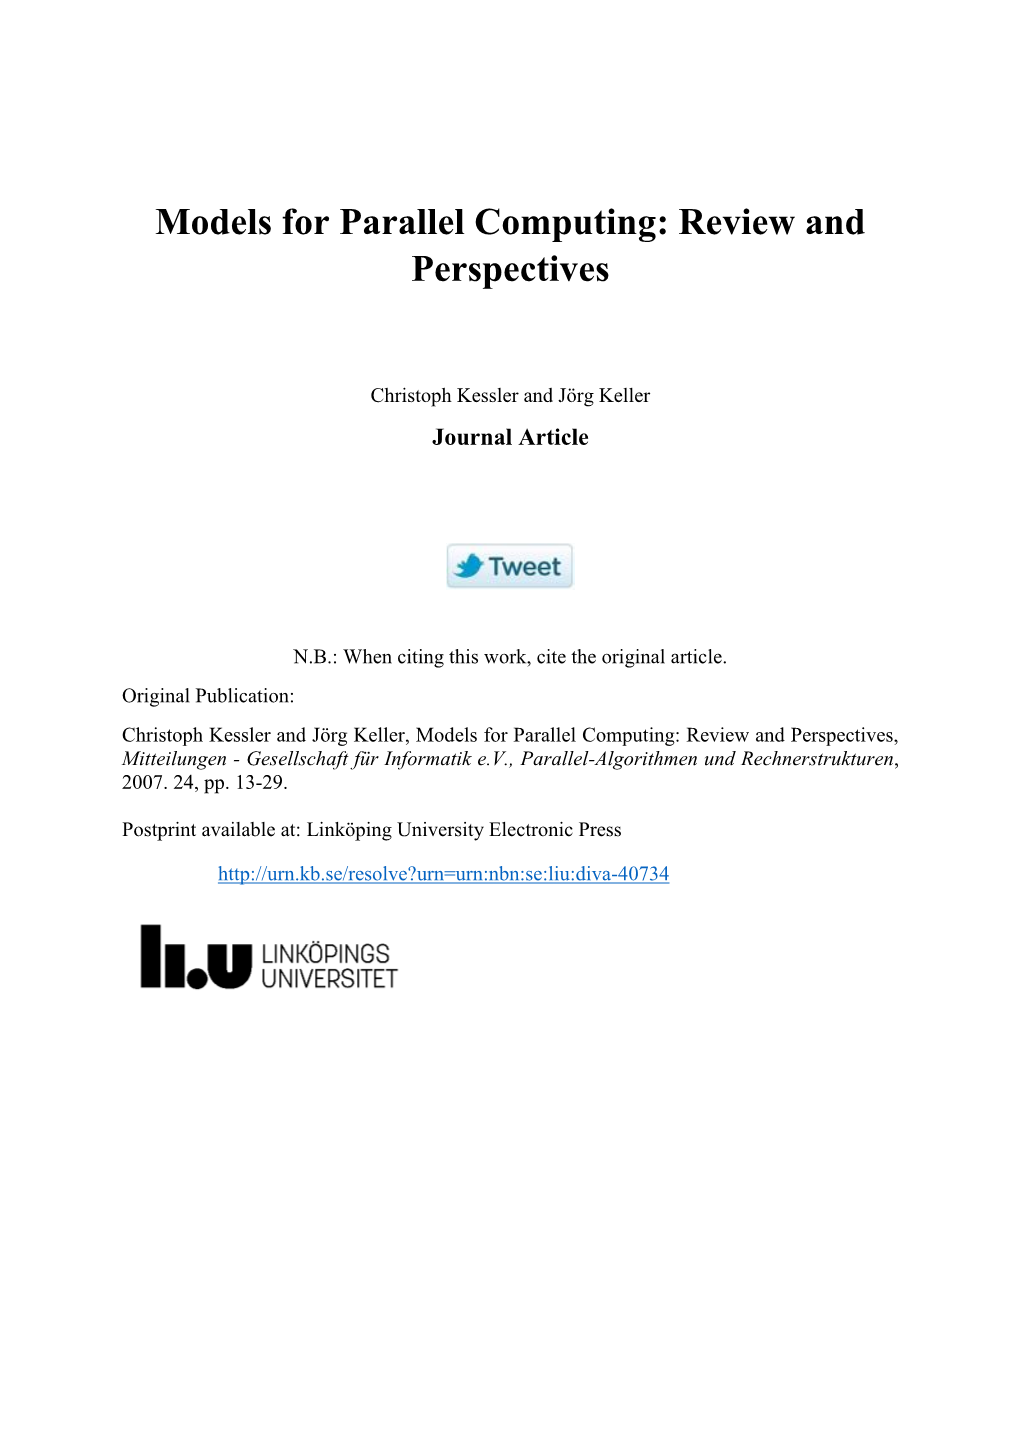 Models for Parallel Computing: Review and Perspectives